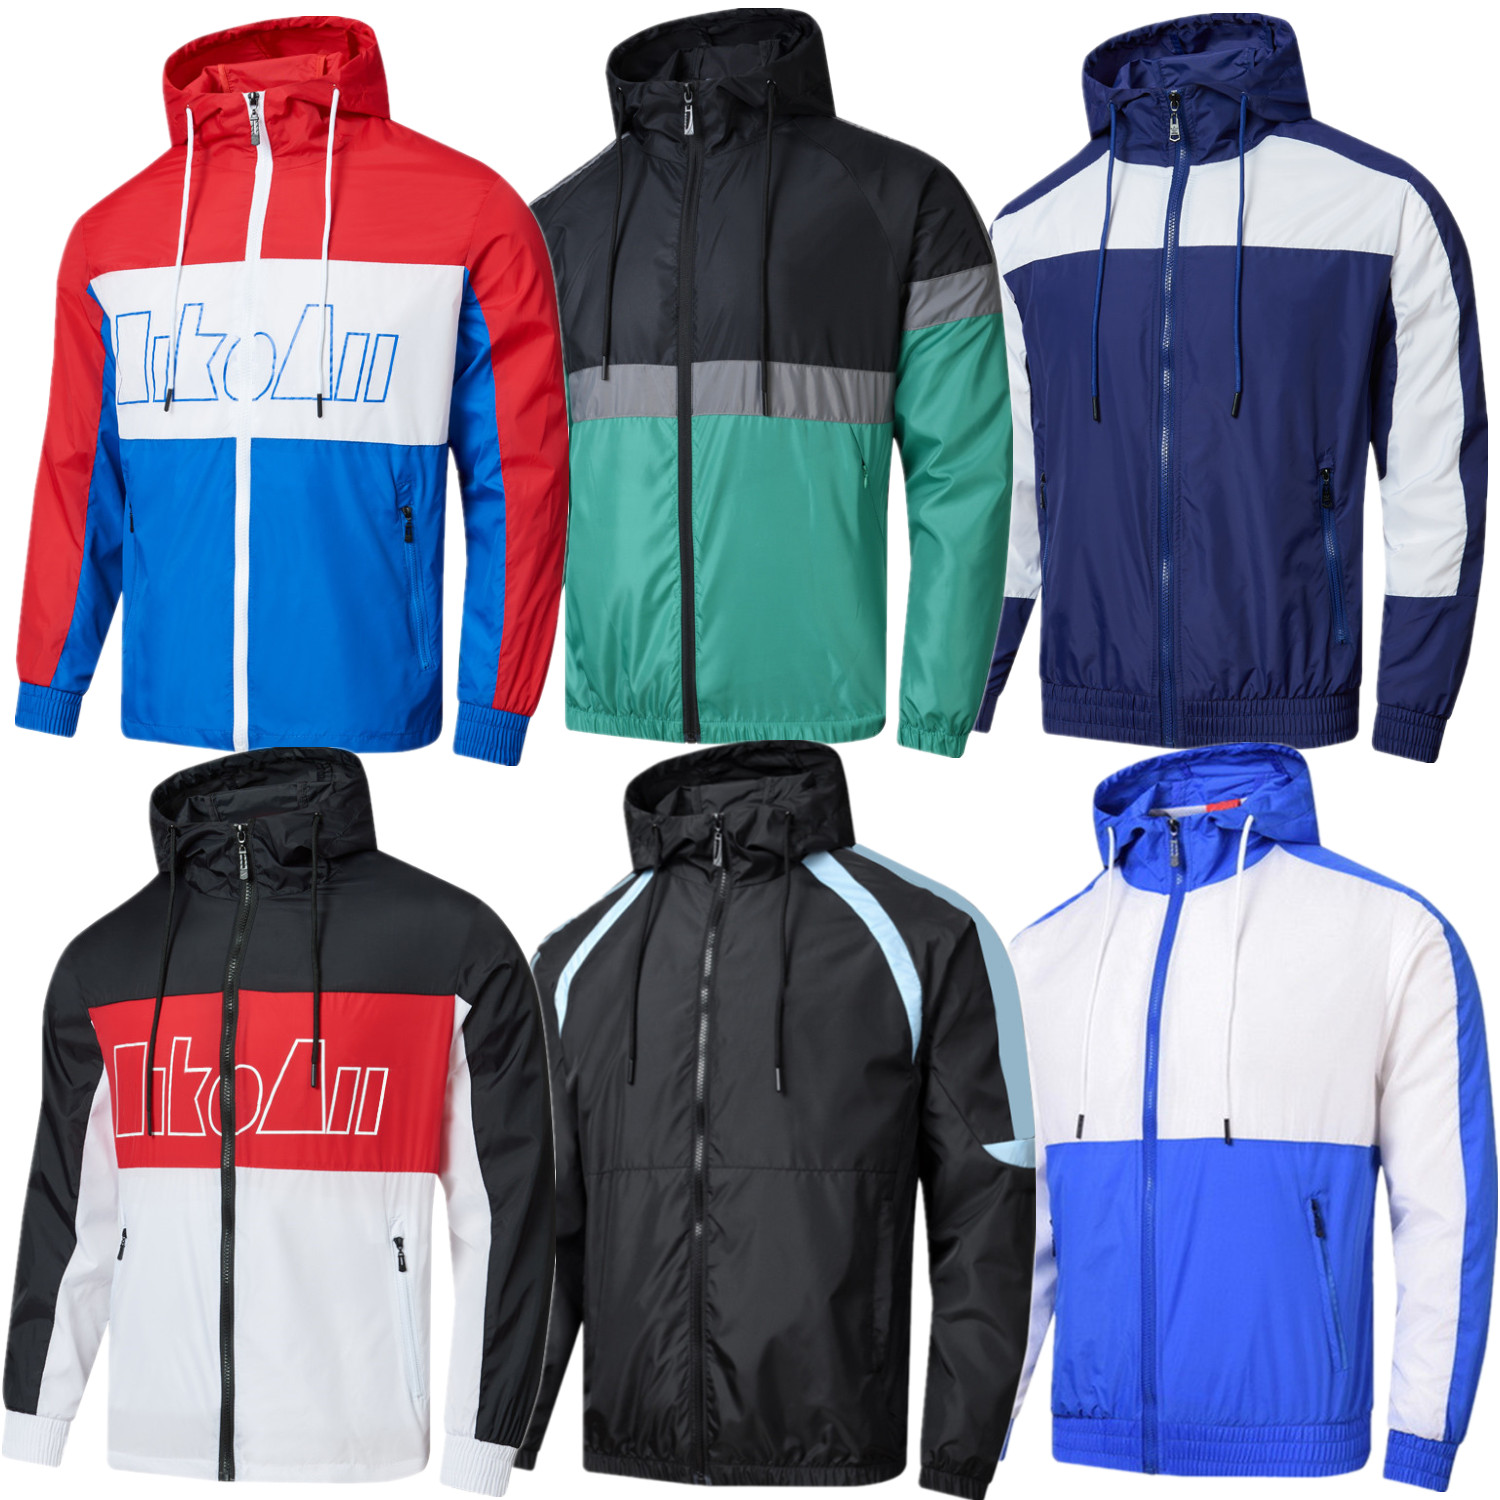 Image of Mens jackets Jersey hoodie sport windbreaker running jacket street fashion multiple colour outerwear coats football training suit M-4XL Asia